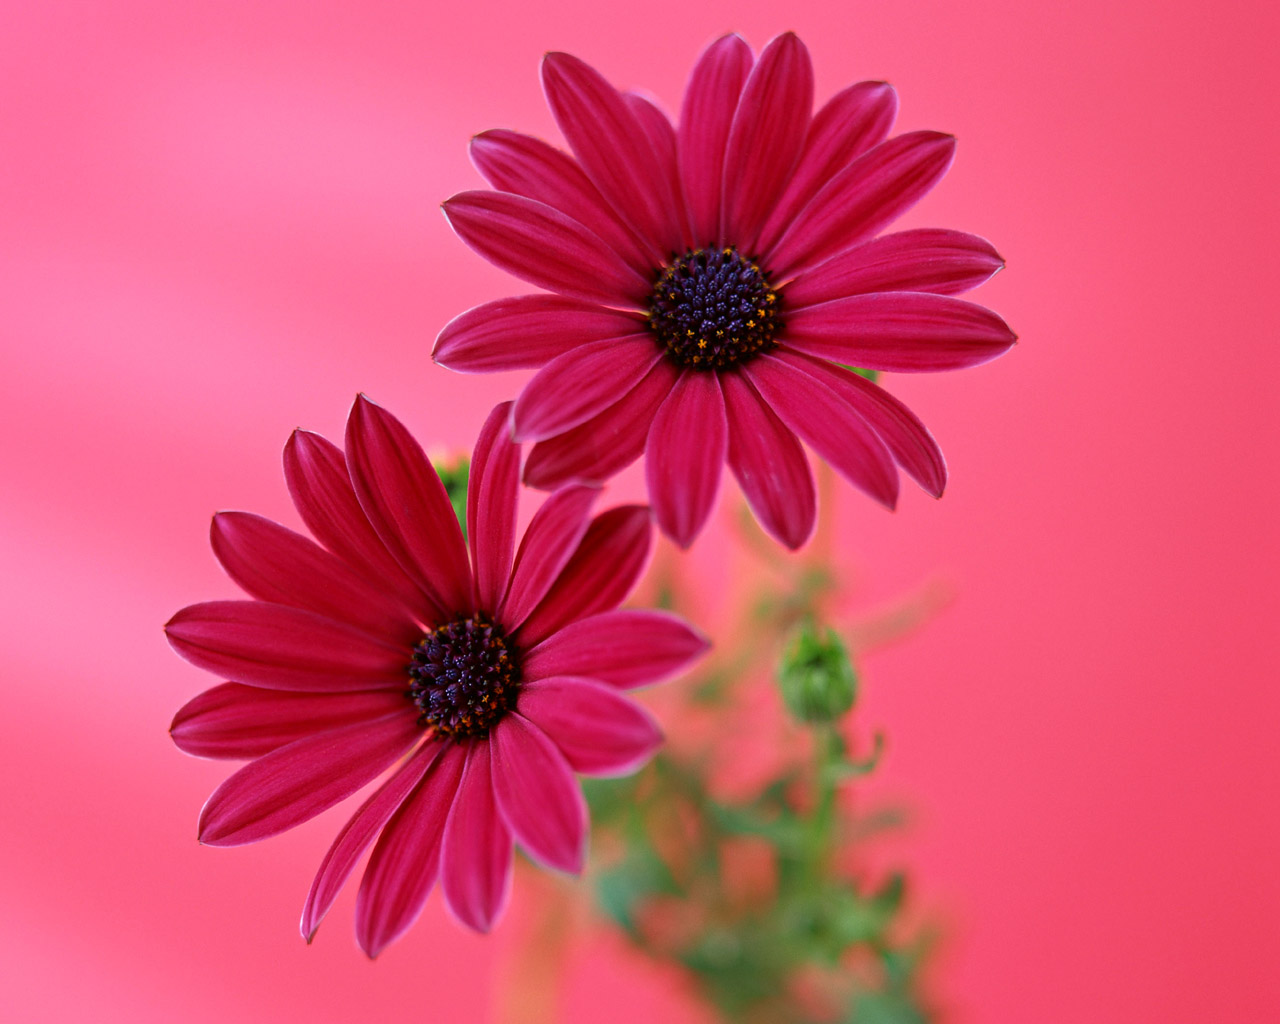 Colorful Gerber Daisy Wallpaper Images Pictures   Becuo 1280x1024